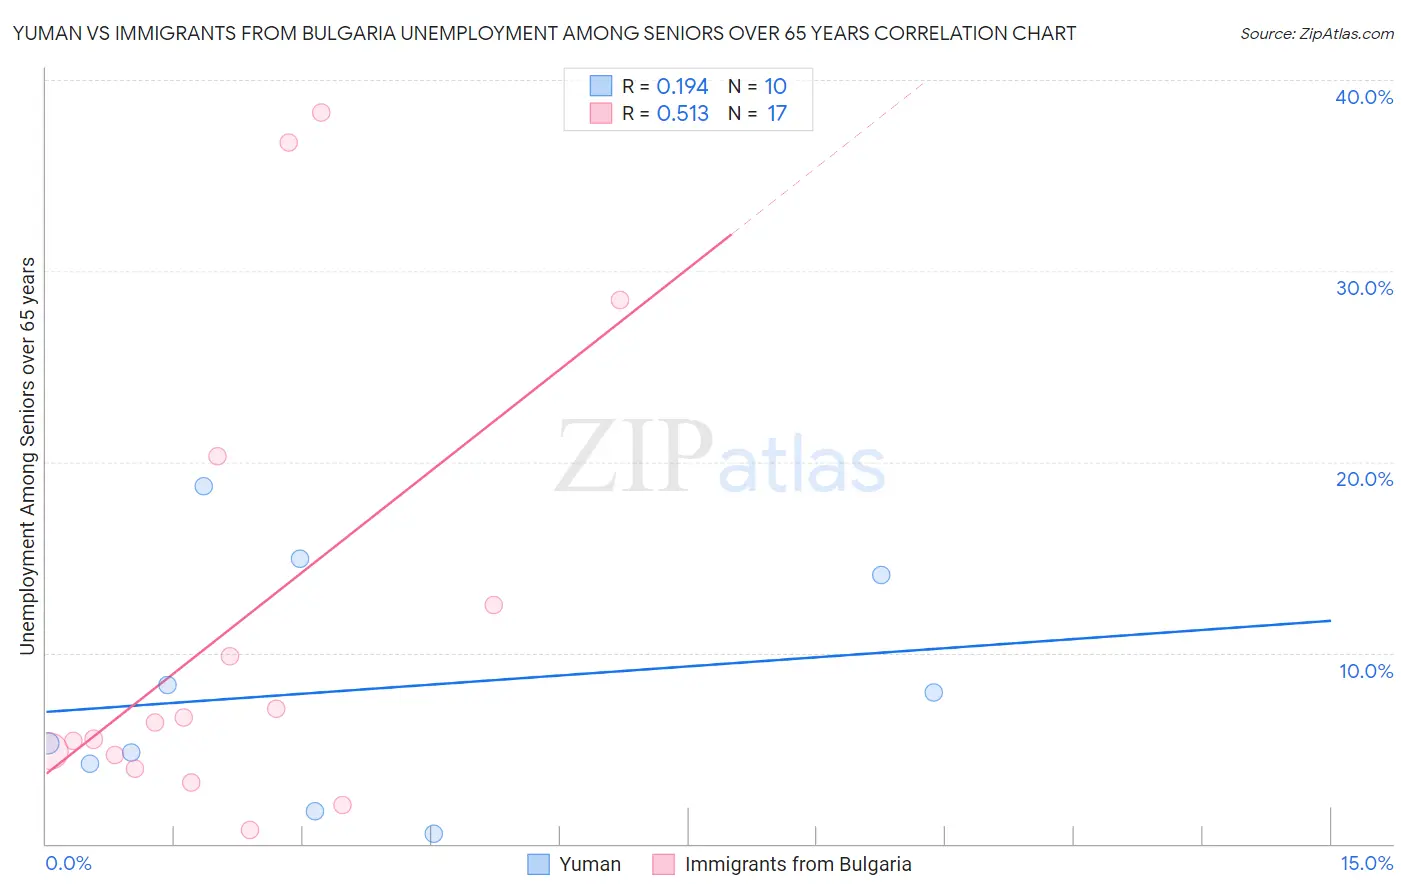 Yuman vs Immigrants from Bulgaria Unemployment Among Seniors over 65 years